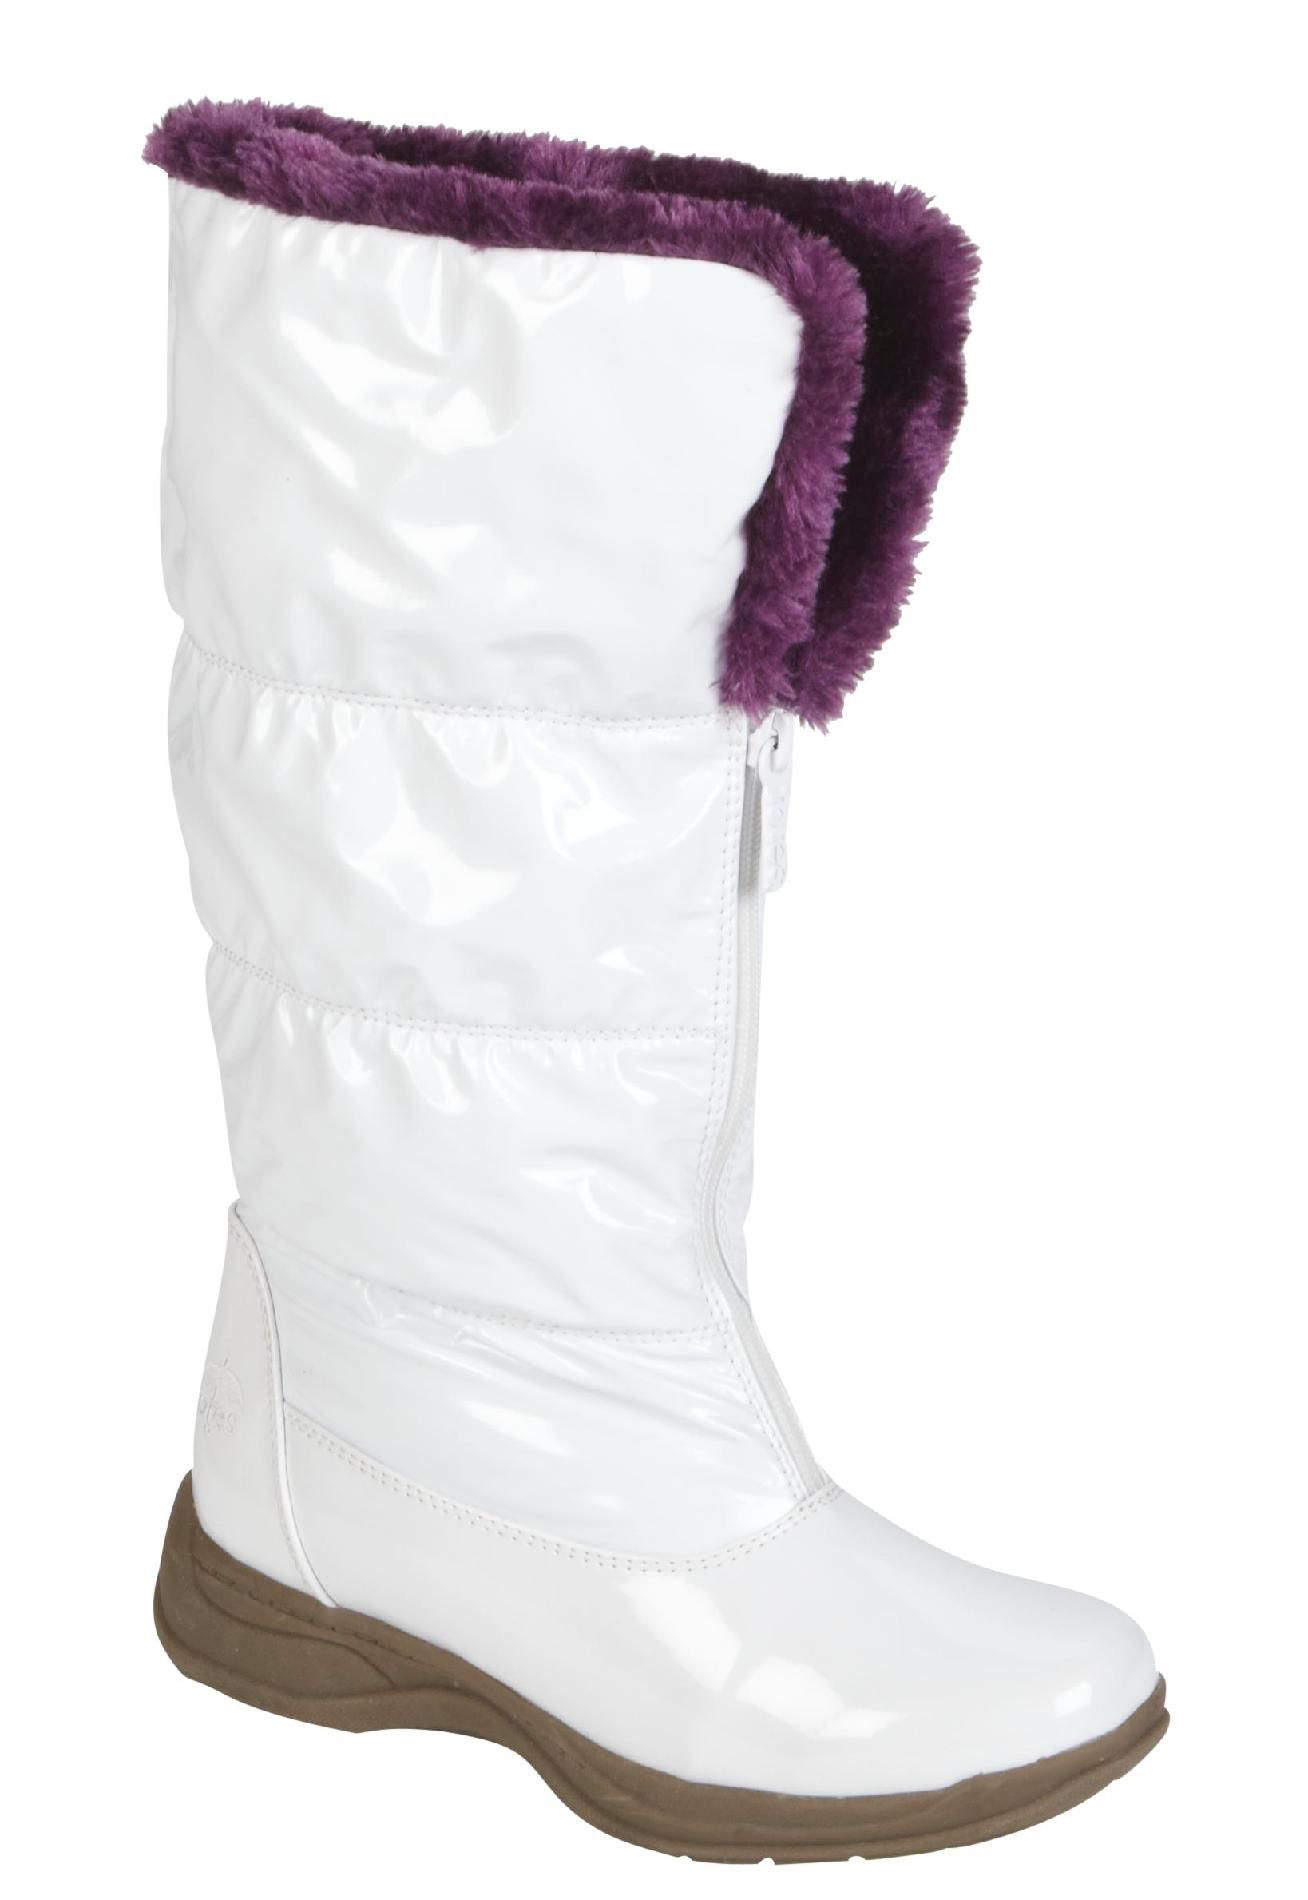 Totes Women's Winter Boot with Faux Fur Trim Icicle - White/Purple